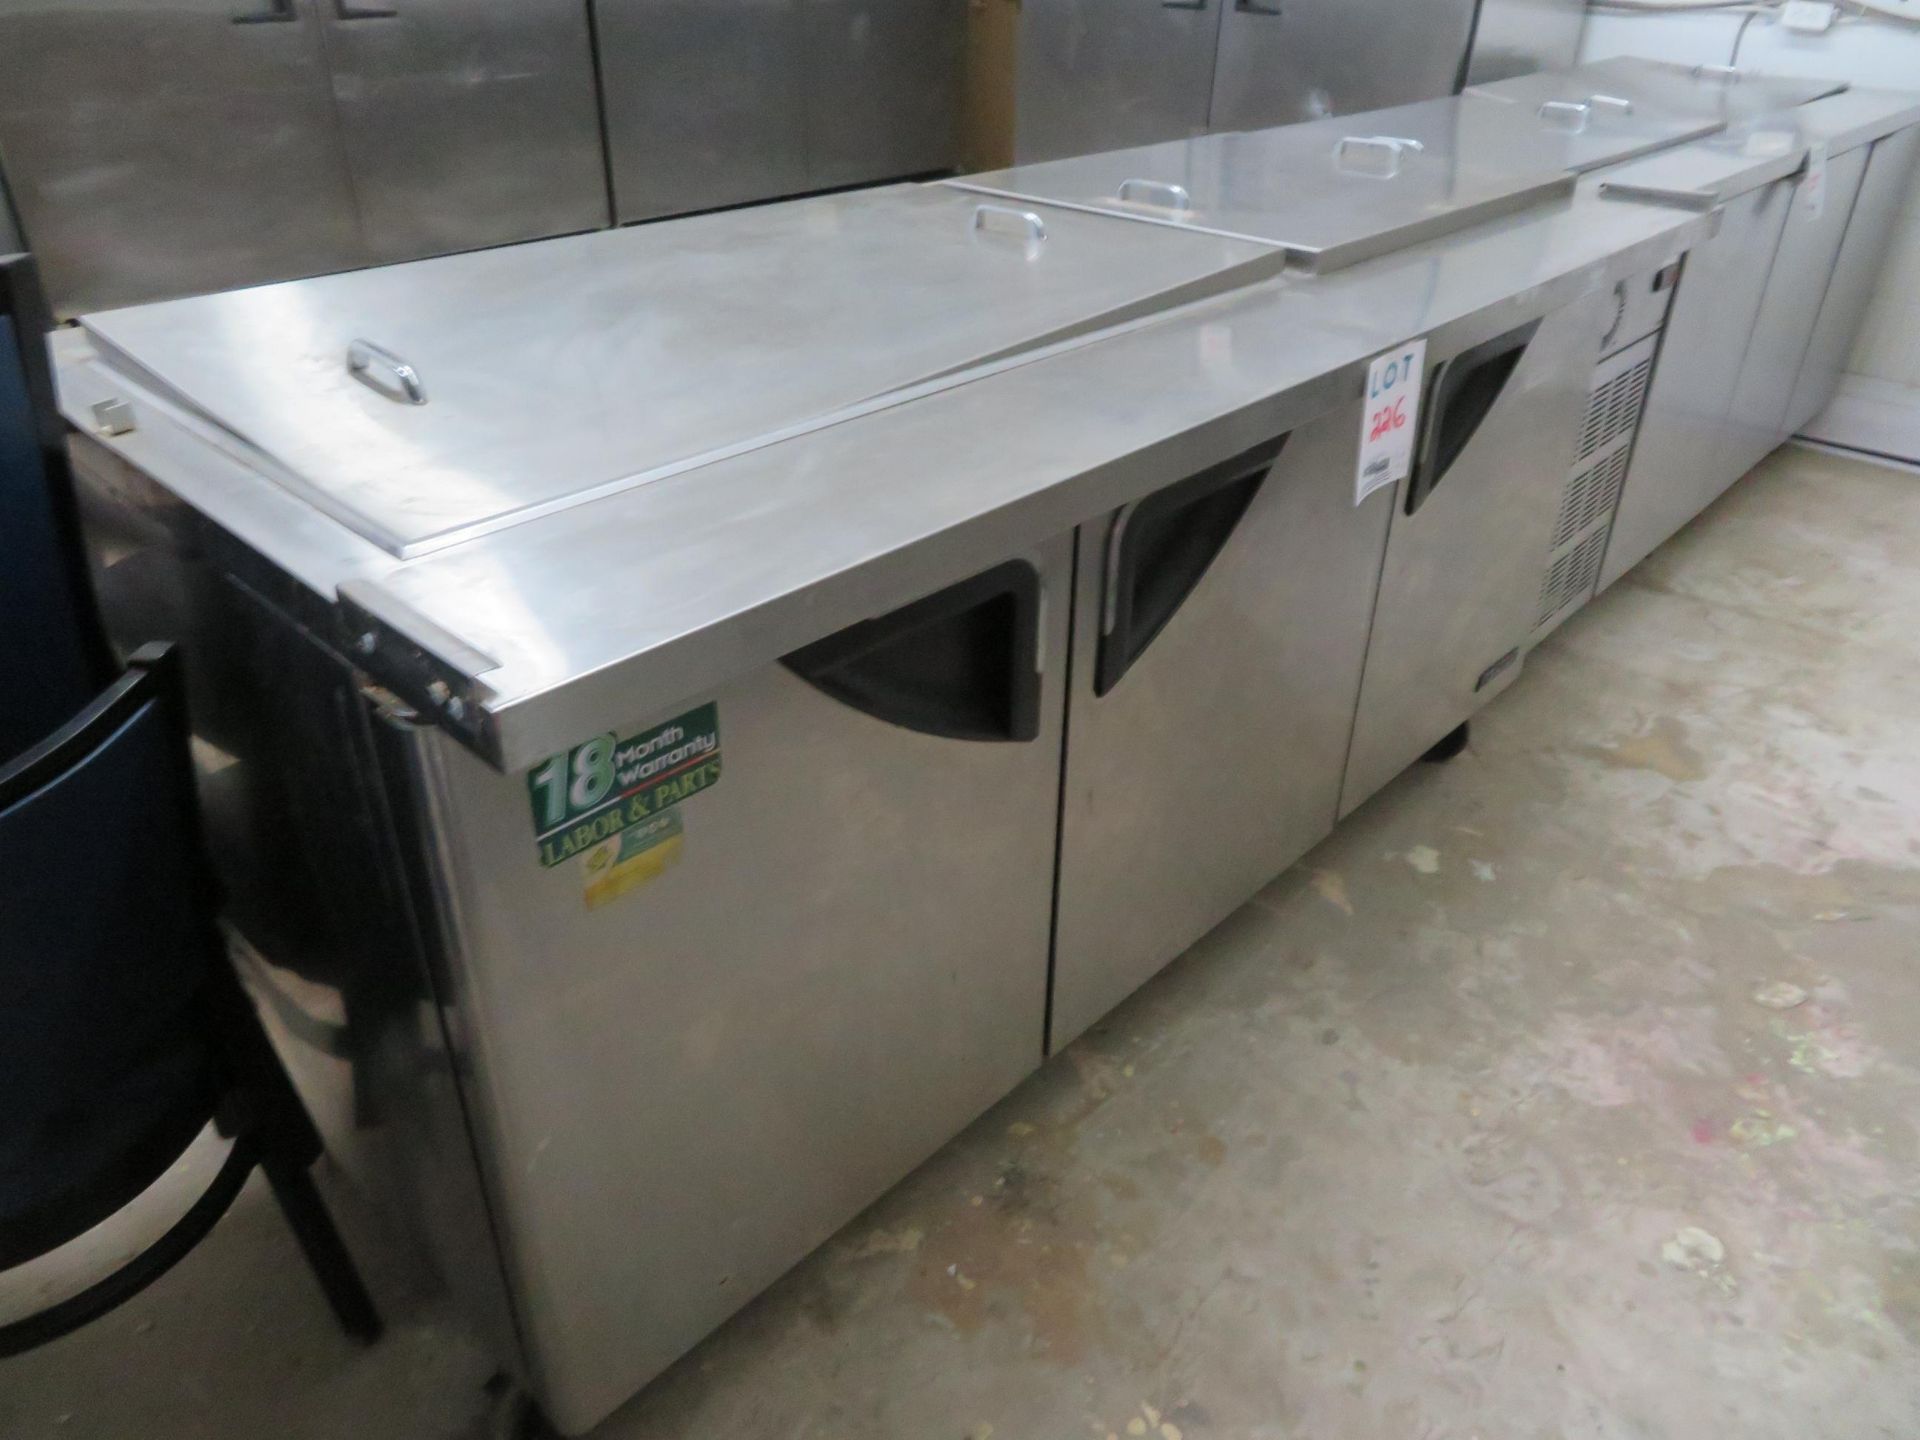 TURBO AIR 3 door stainless steel cooling unit/preparation table, Mod #TST-72SD-30, approx. 75"w x